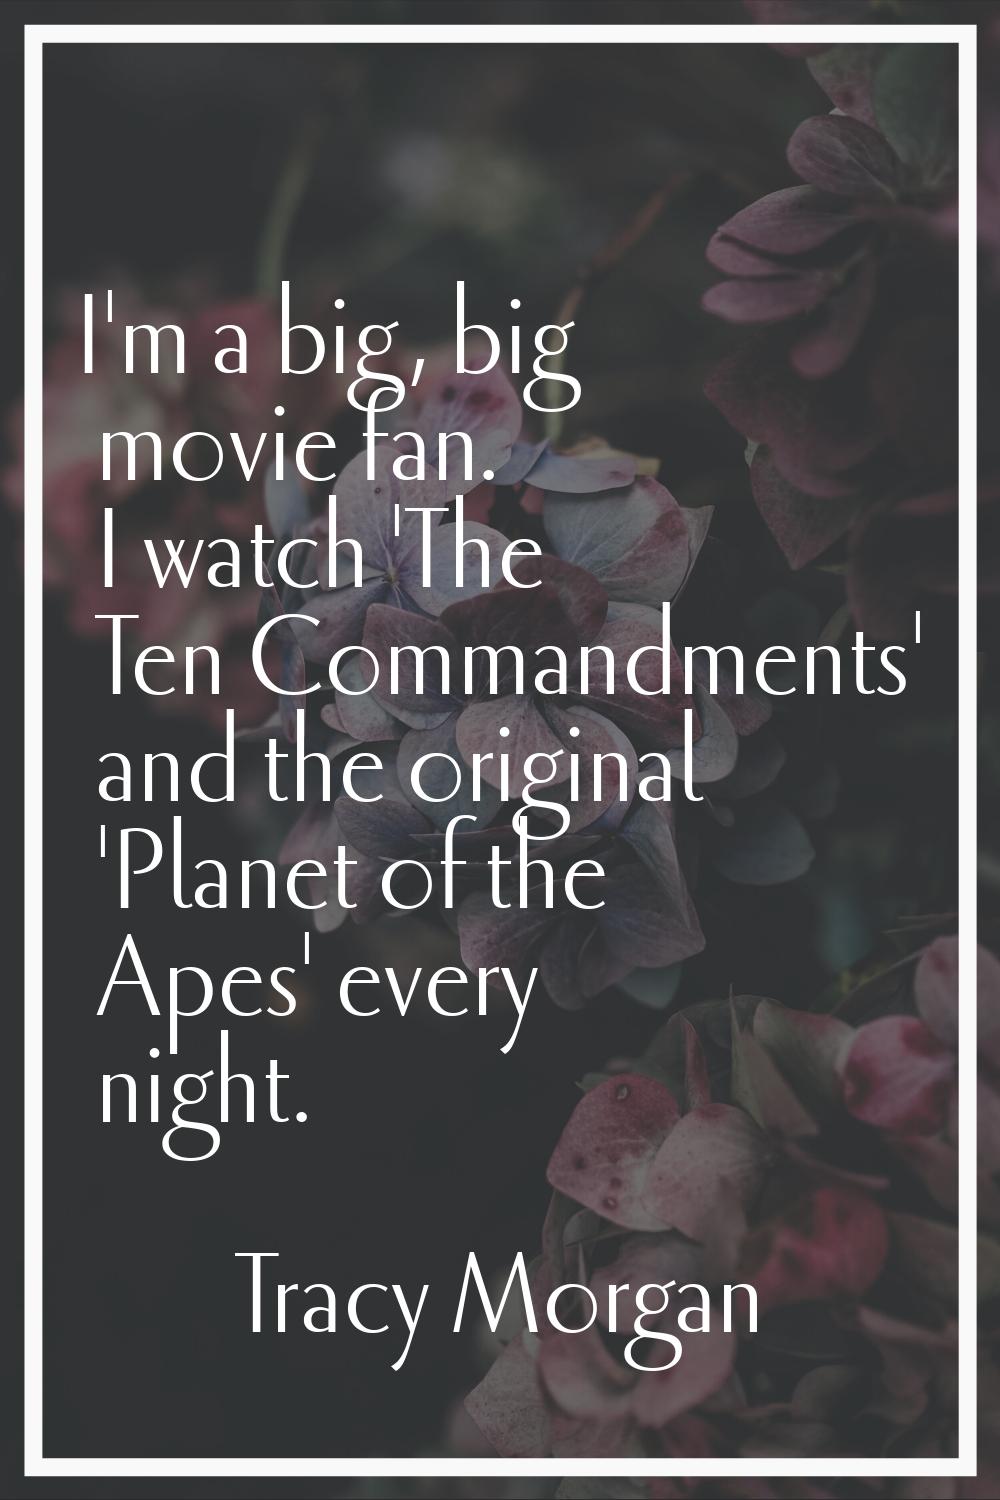 I'm a big, big movie fan. I watch 'The Ten Commandments' and the original 'Planet of the Apes' ever